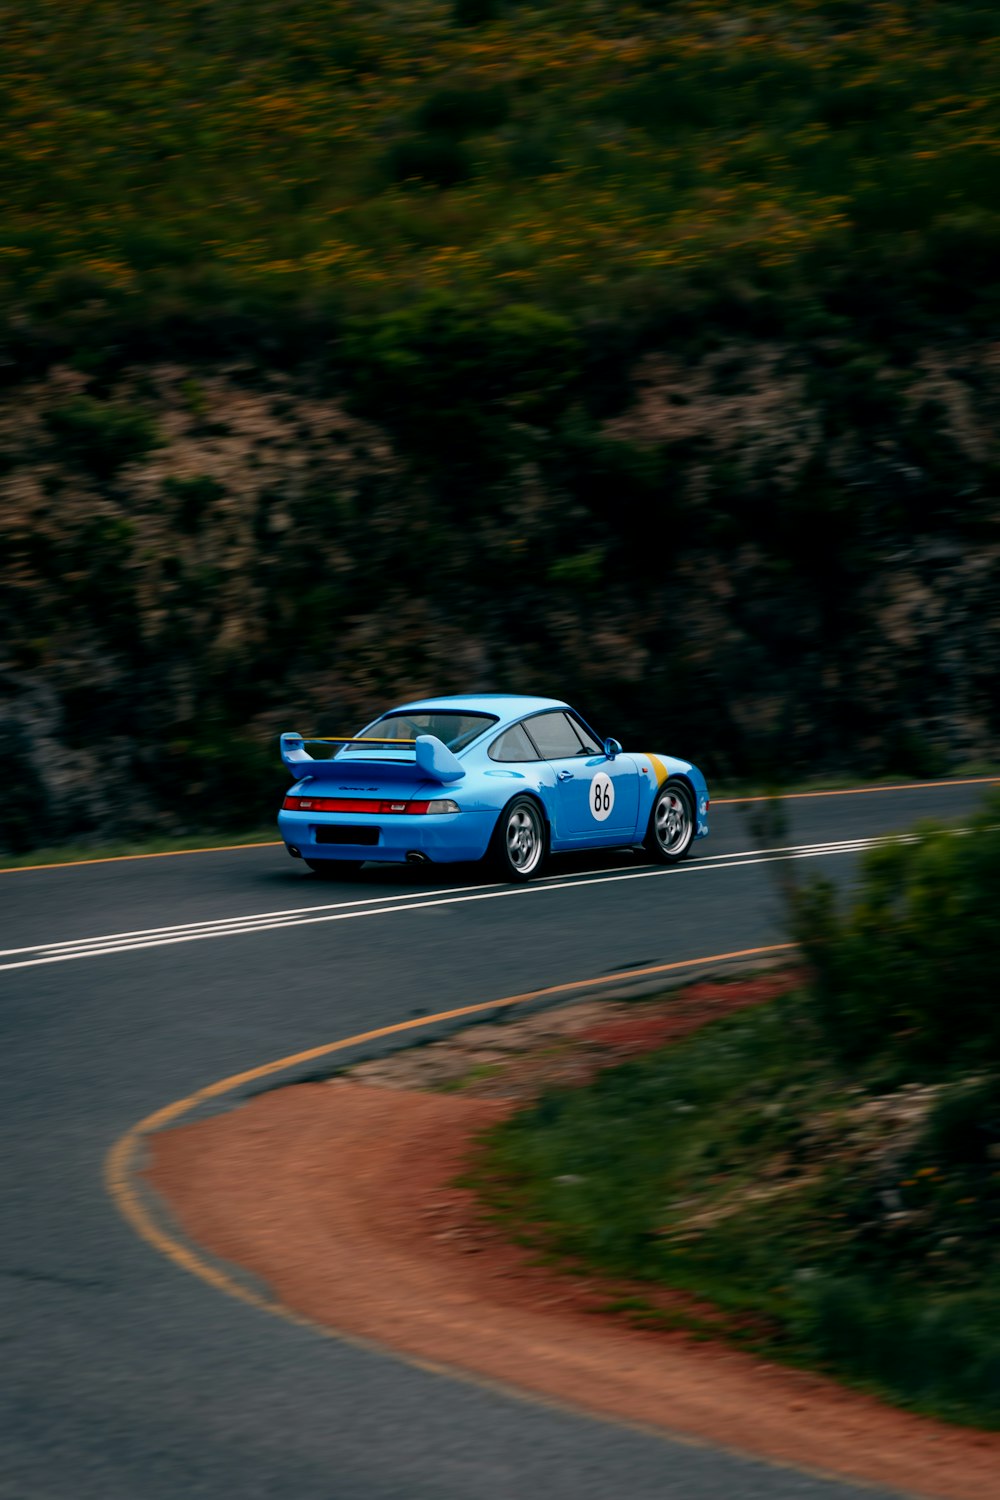 a blue sports car driving down a winding road